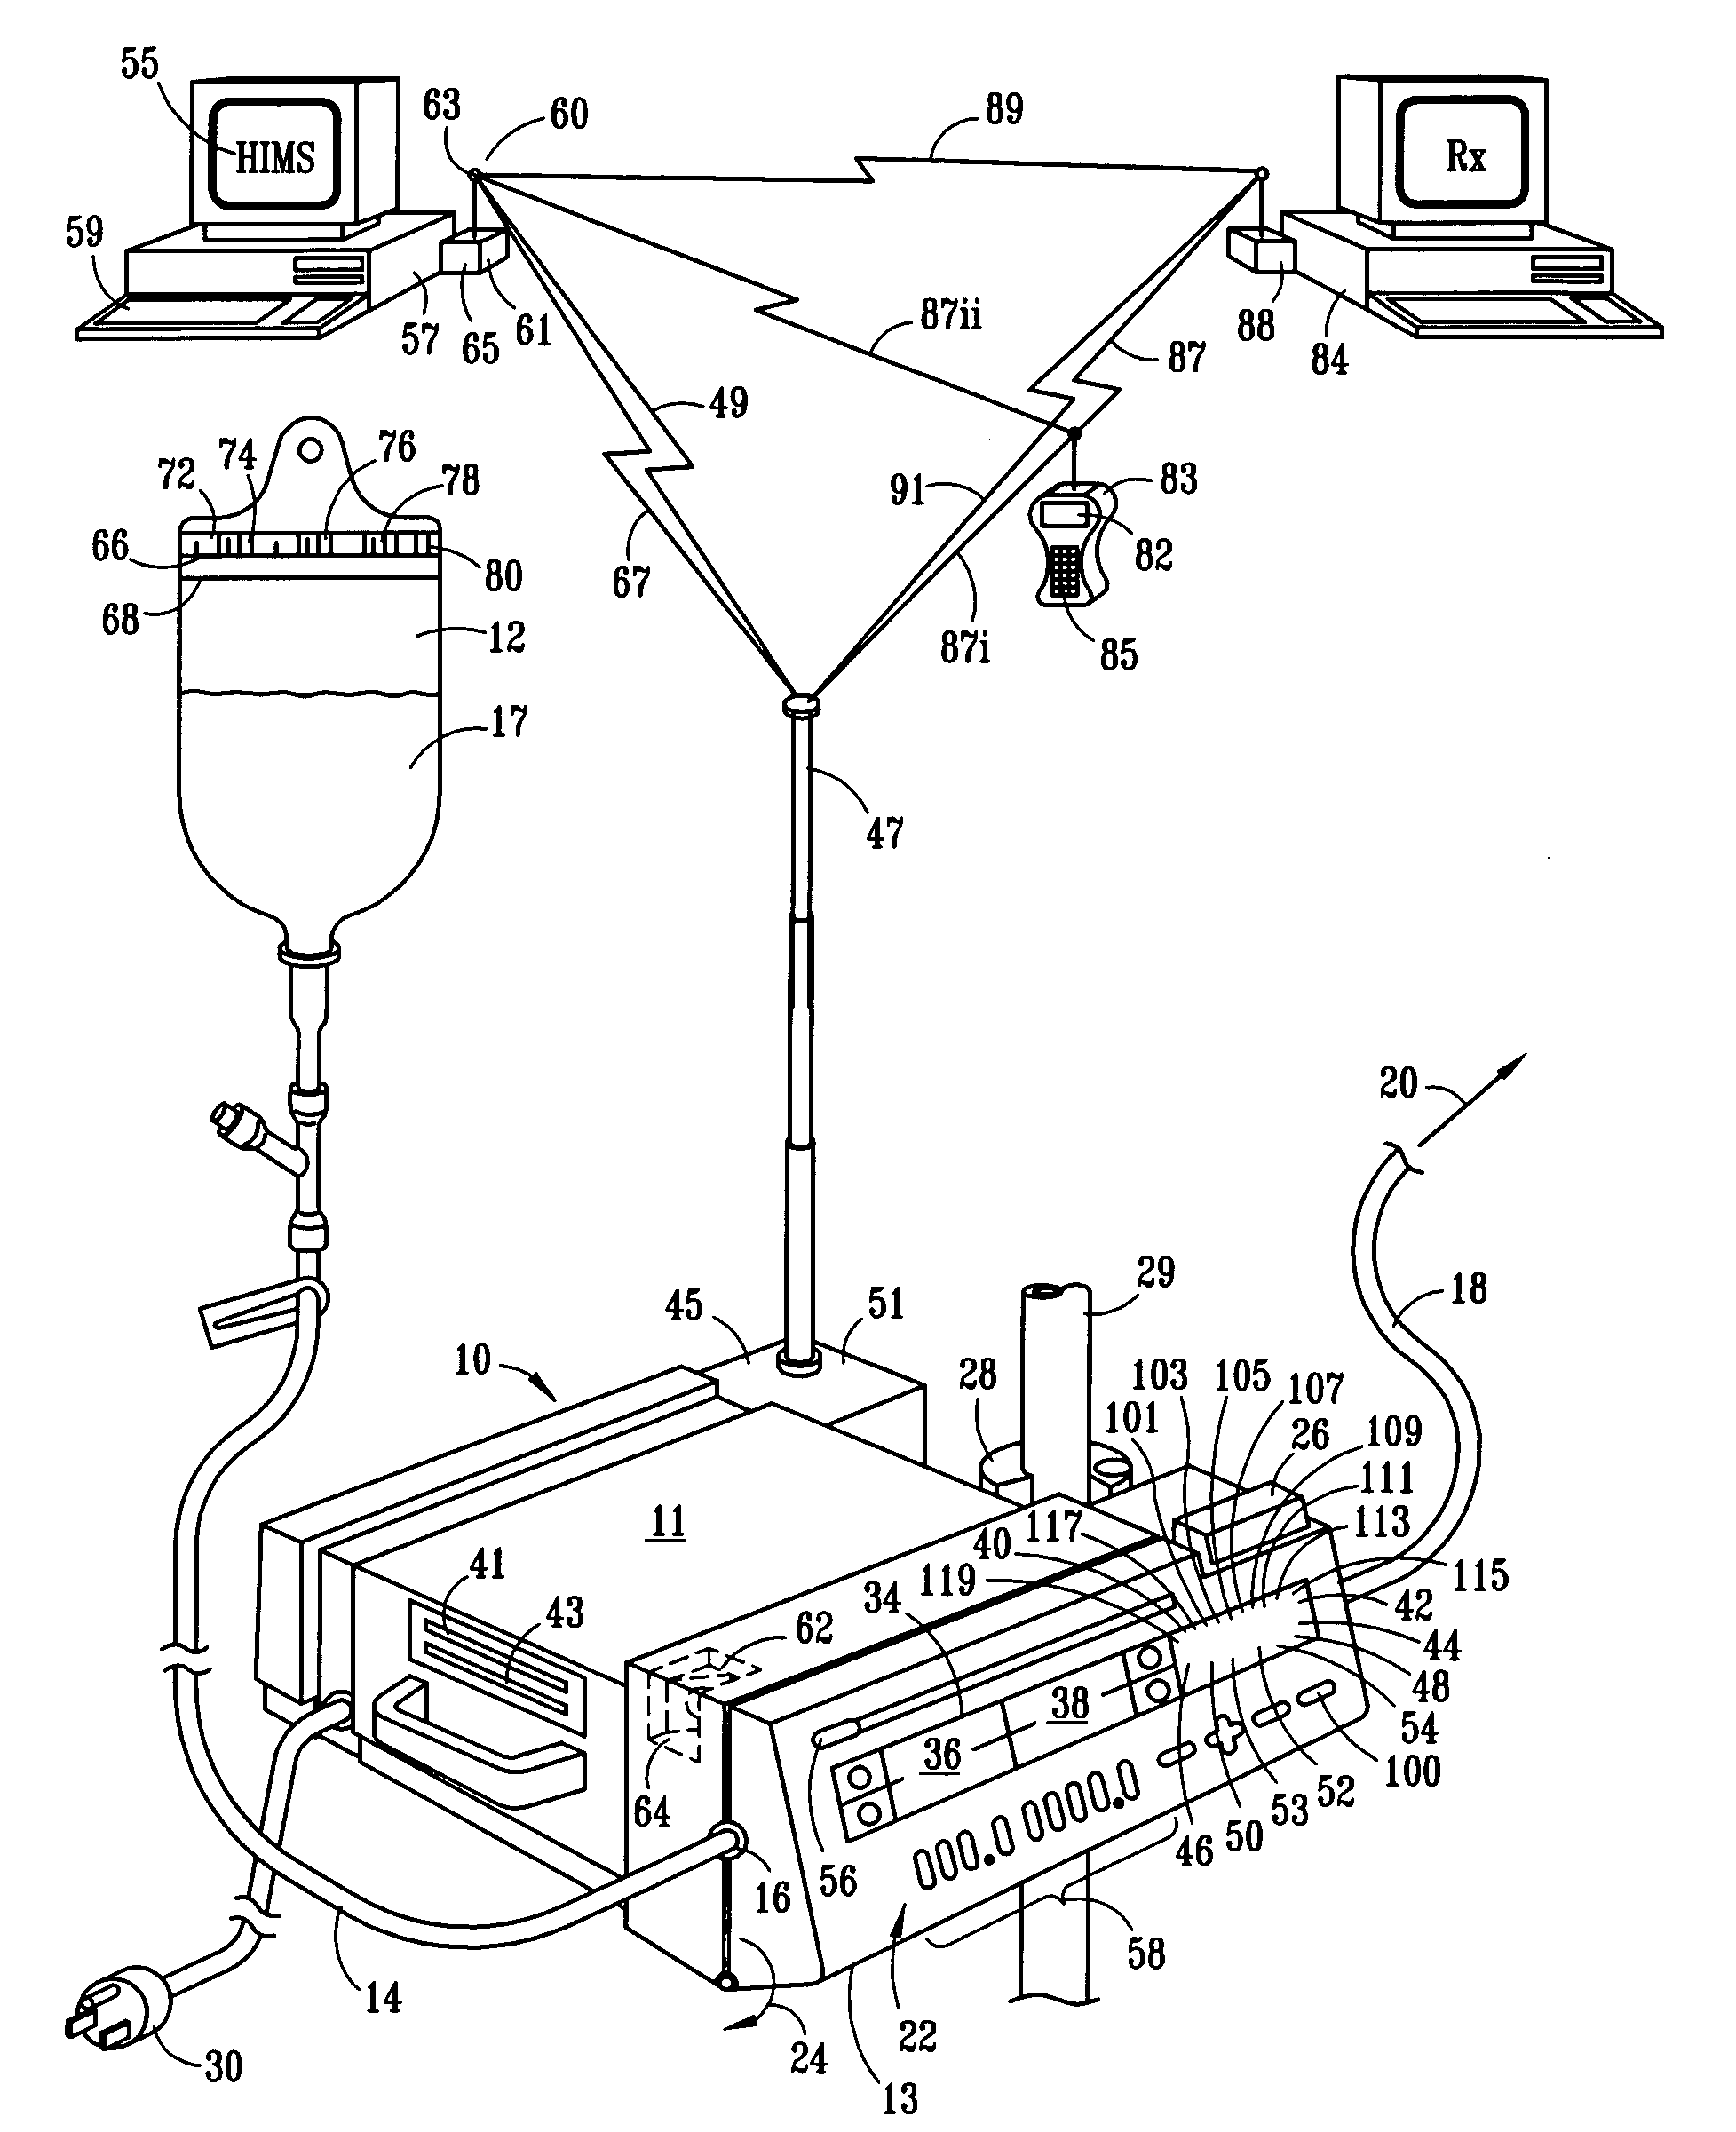 Patient medication IV delivery pump with wireless communication to a hospital information management system